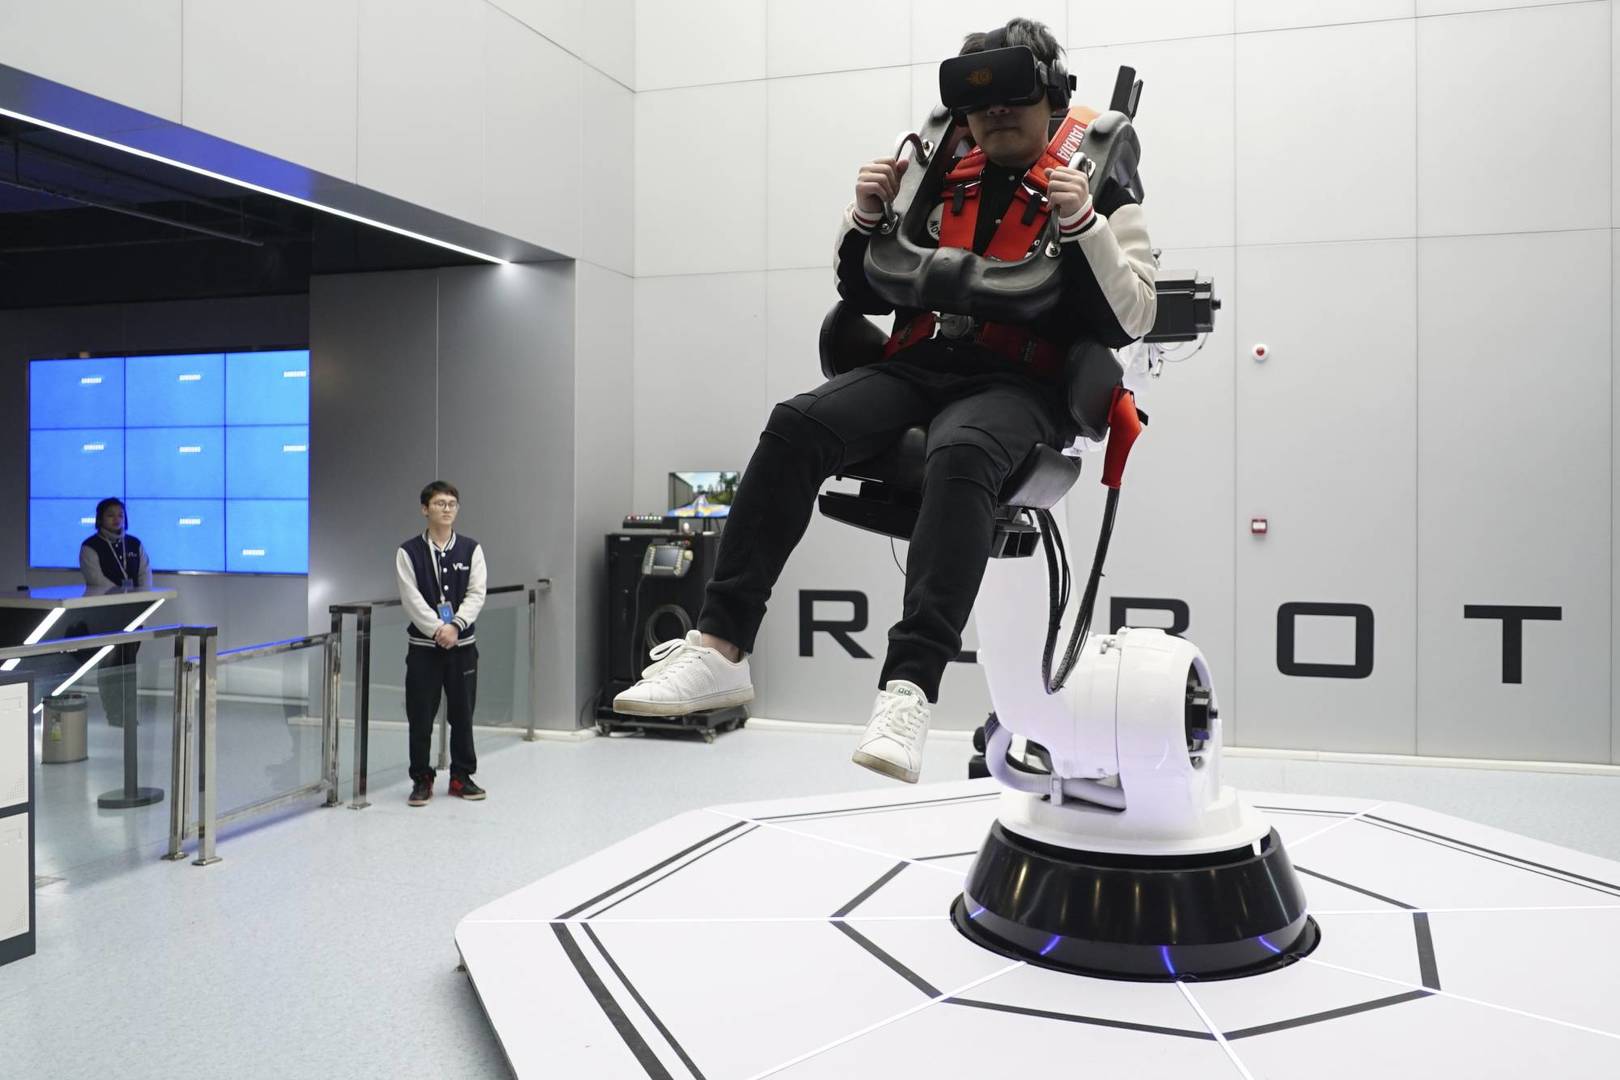 In this April 2, 2019, photo, a visitor rides a virtual roller coaster ride operated by a robotic arm in a VR theme park in Nanchang, China. One of the largest virtual reality theme parks in the world has opened its doors in southwestern China, sporting 42 rides and exhibits from VR bumper cars to VR shoot-em-ups. It's part of an effort by Beijing to get ordinary people excited about the technology - part of a long-term bet that VR will come into widespread use. (AP Photo/Dake Kang)